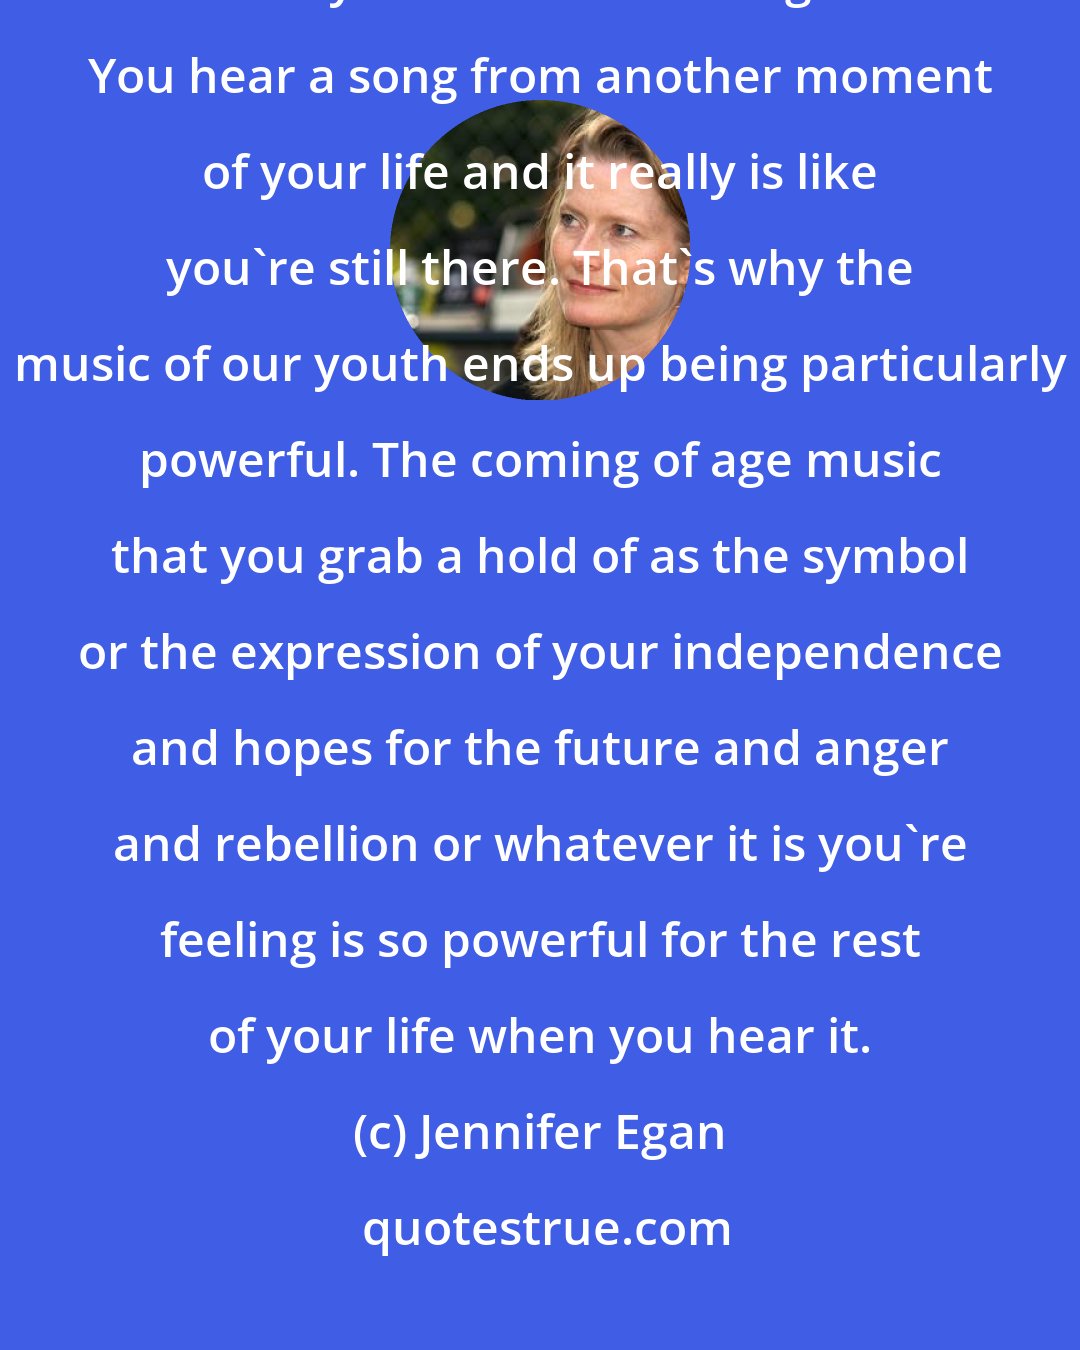 Jennifer Egan: Music and time have such an interesting relationship. Music makes time fall away like almost nothing else. You hear a song from another moment of your life and it really is like you're still there. That's why the music of our youth ends up being particularly powerful. The coming of age music that you grab a hold of as the symbol or the expression of your independence and hopes for the future and anger and rebellion or whatever it is you're feeling is so powerful for the rest of your life when you hear it.